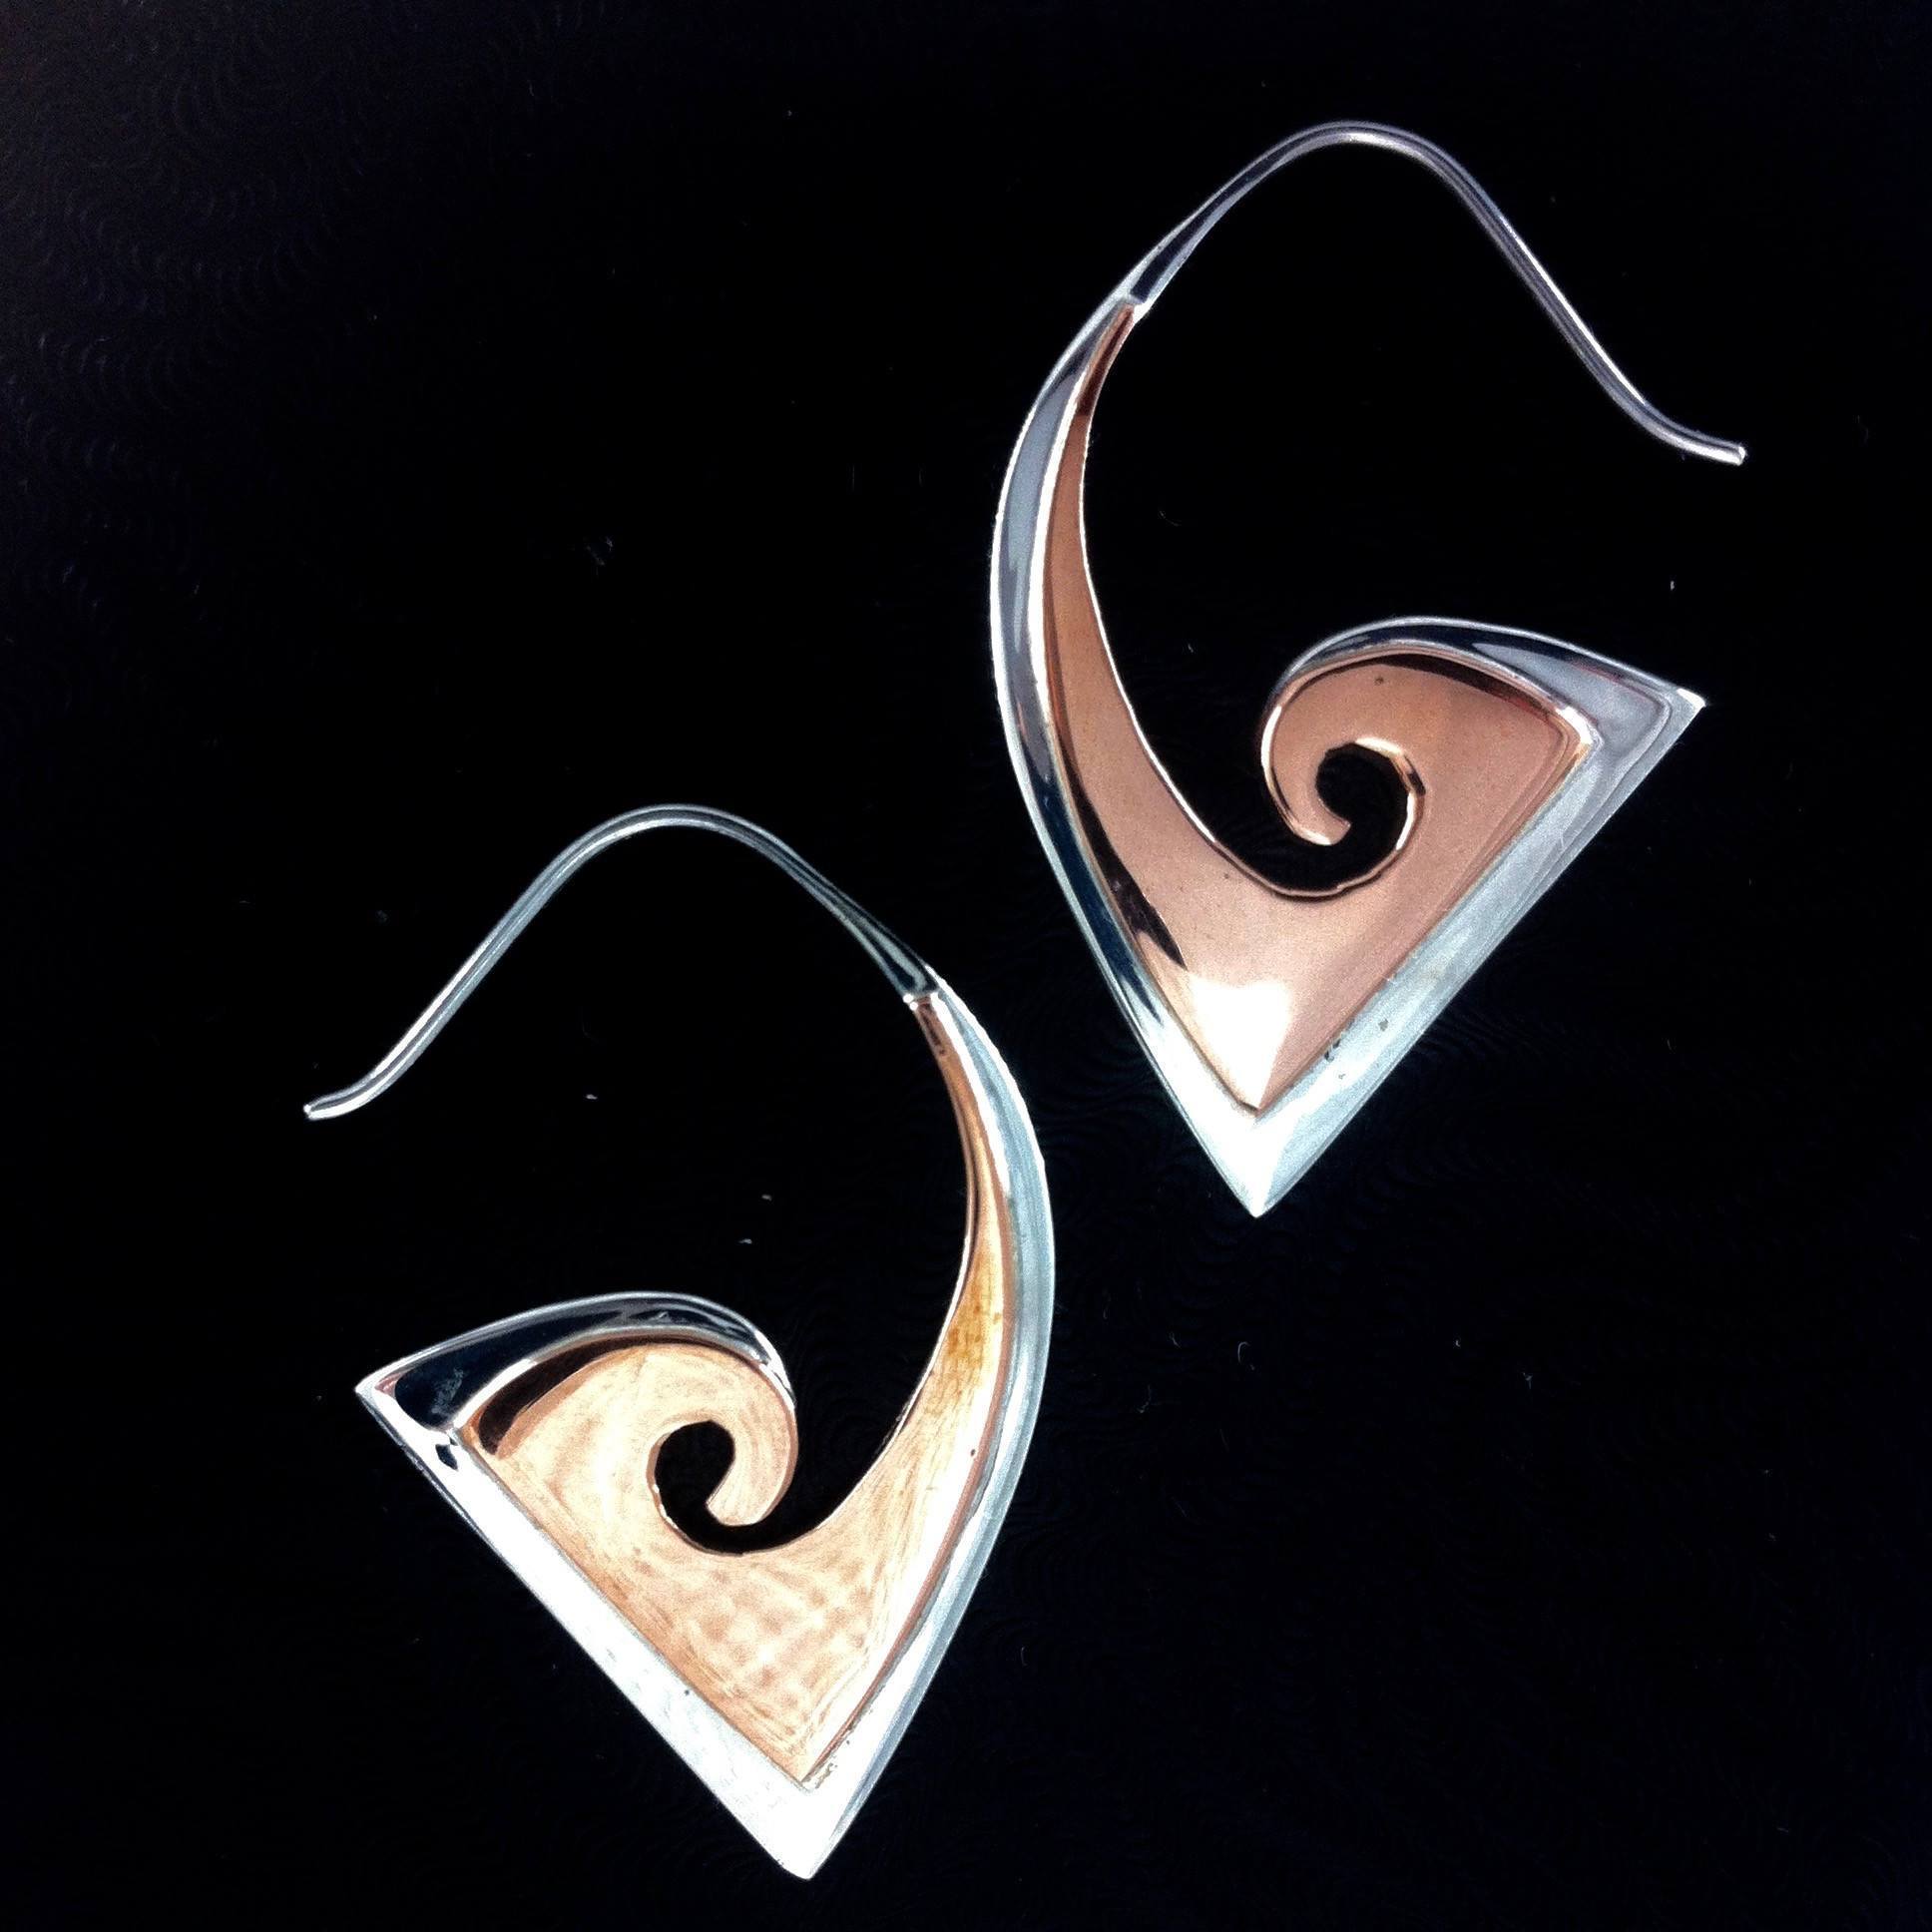 Tribal Earrings :|: Curved Angle. sterling silver with copper highlights earrings.